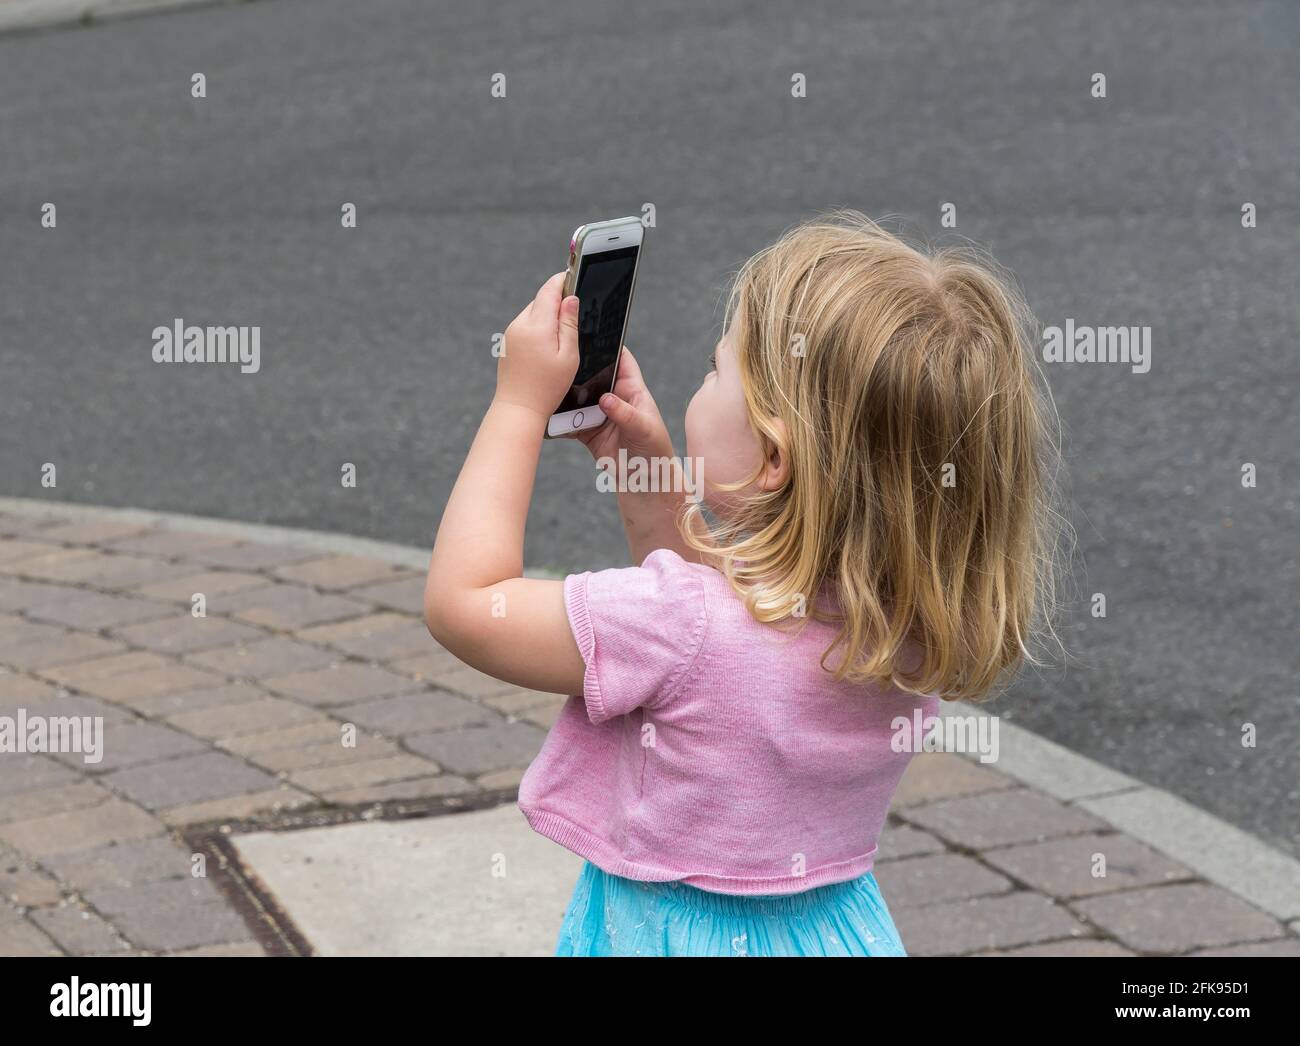 Little girl takes a photo with a smartphone Stock Photo